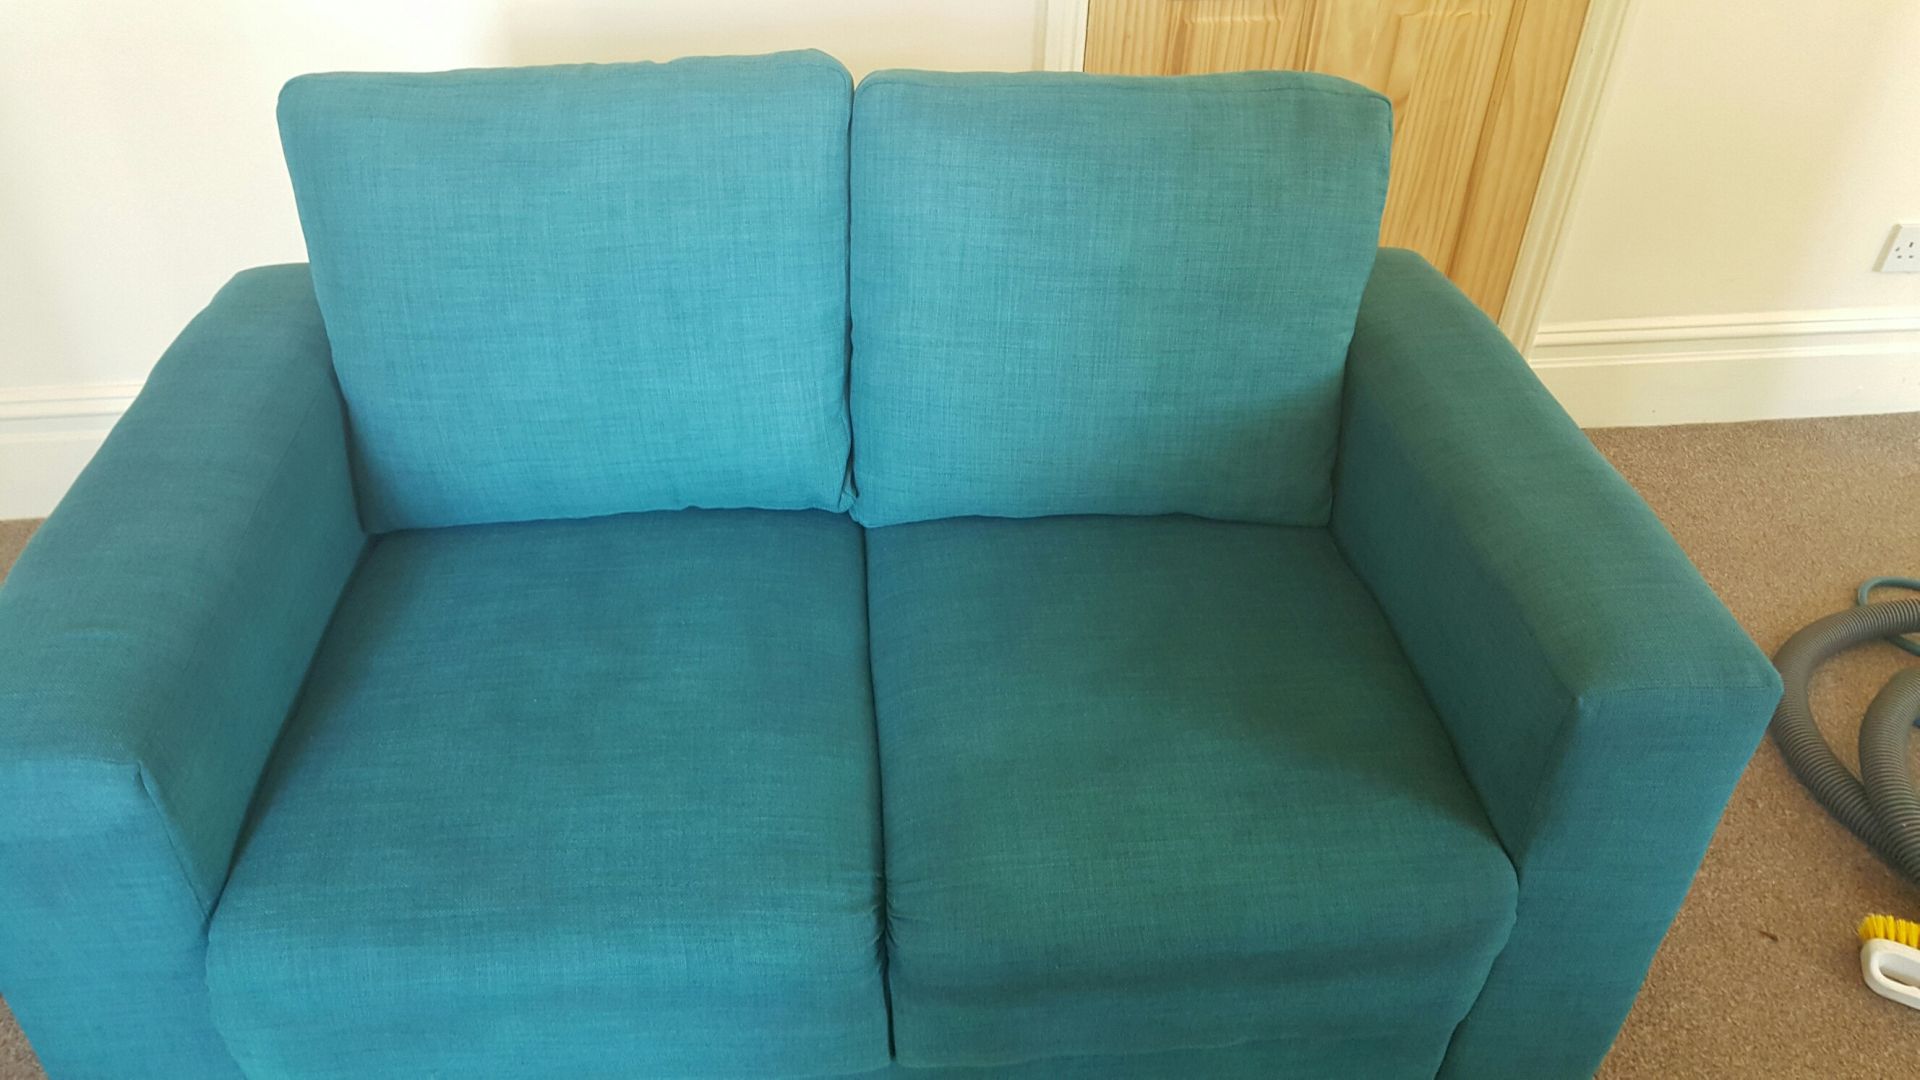 Upholstery & Fabric Cleaning Lincolnshire - Lincs Multi-Clean